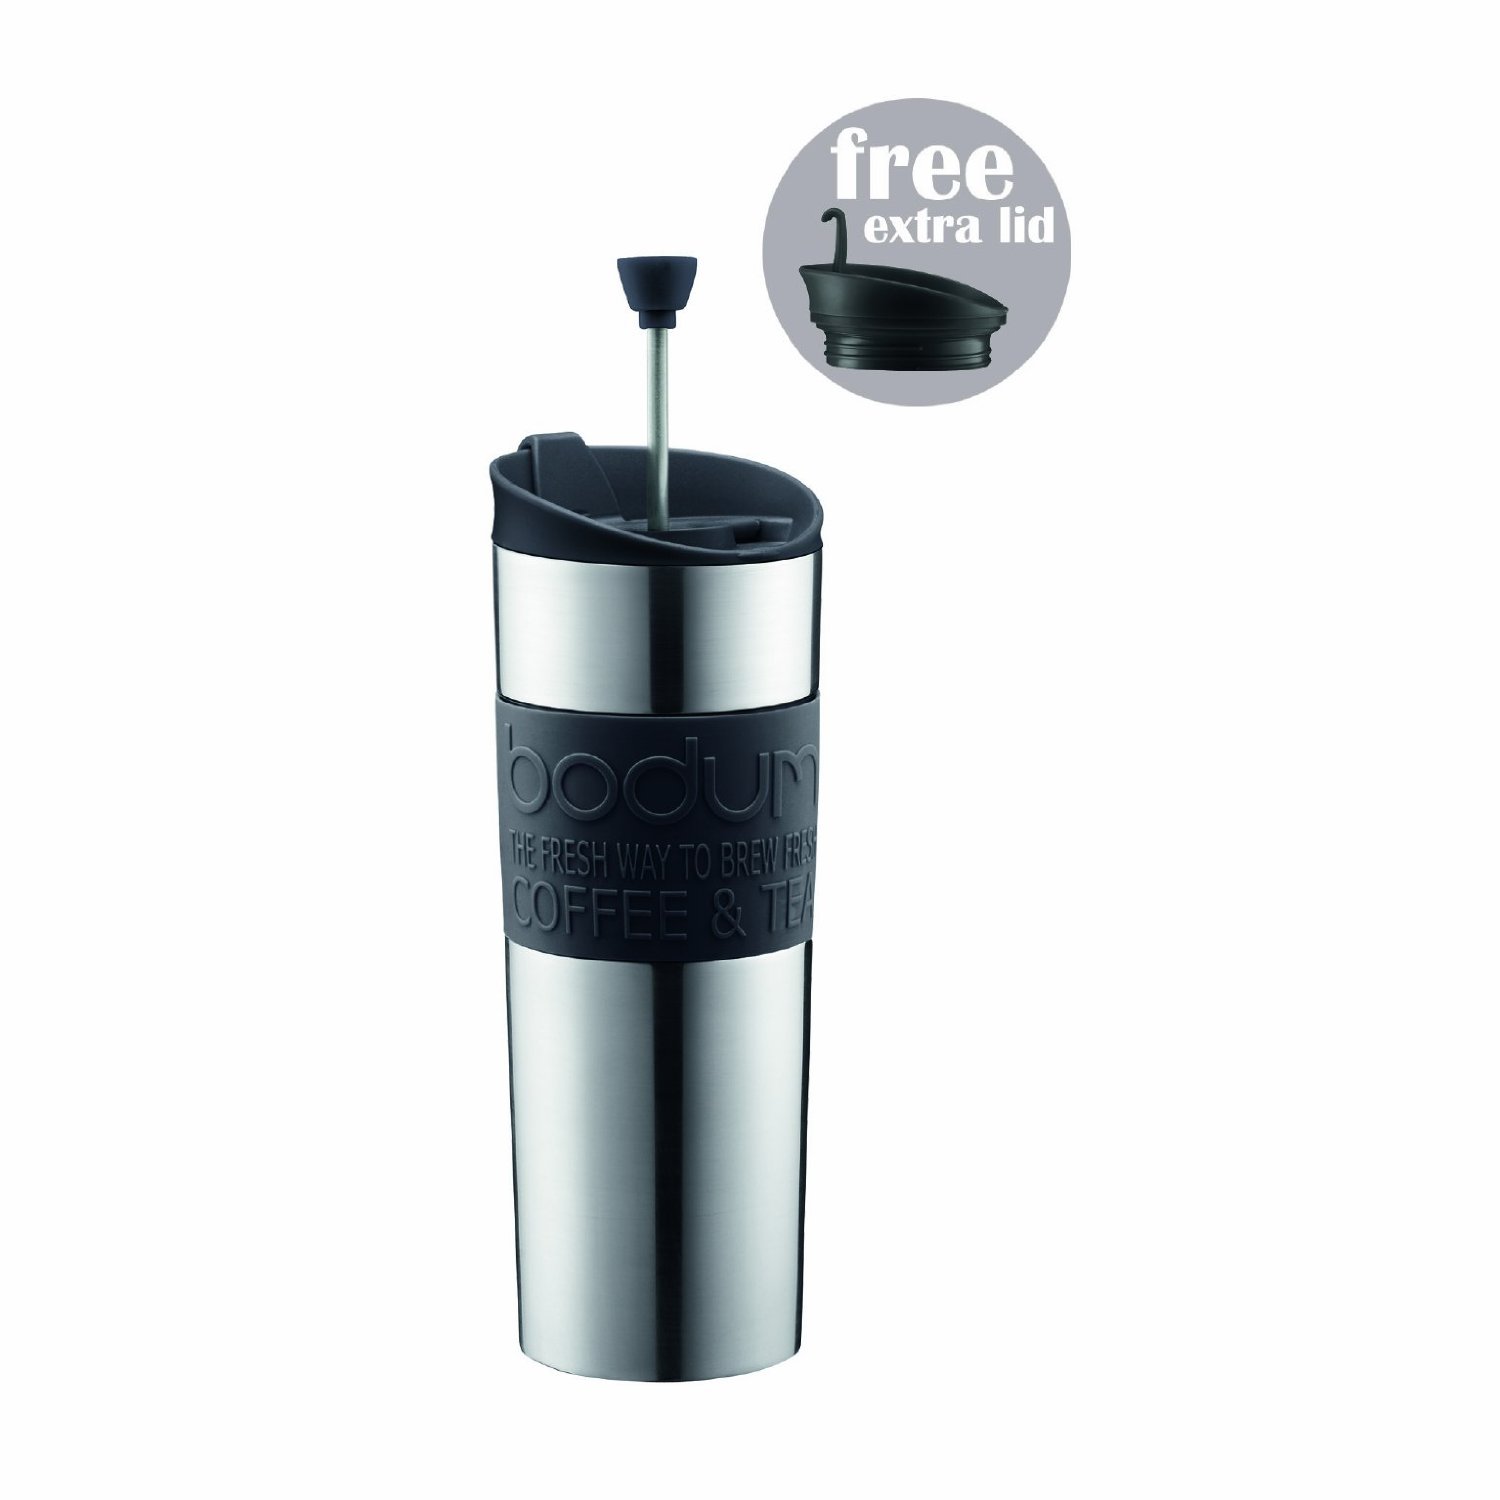 Bodum Double-Wall Stainless Steel 0.45 Liter Travel Coffee and Tea Press, with Bonus Tumbler Lid, 16-Ounce $23.74